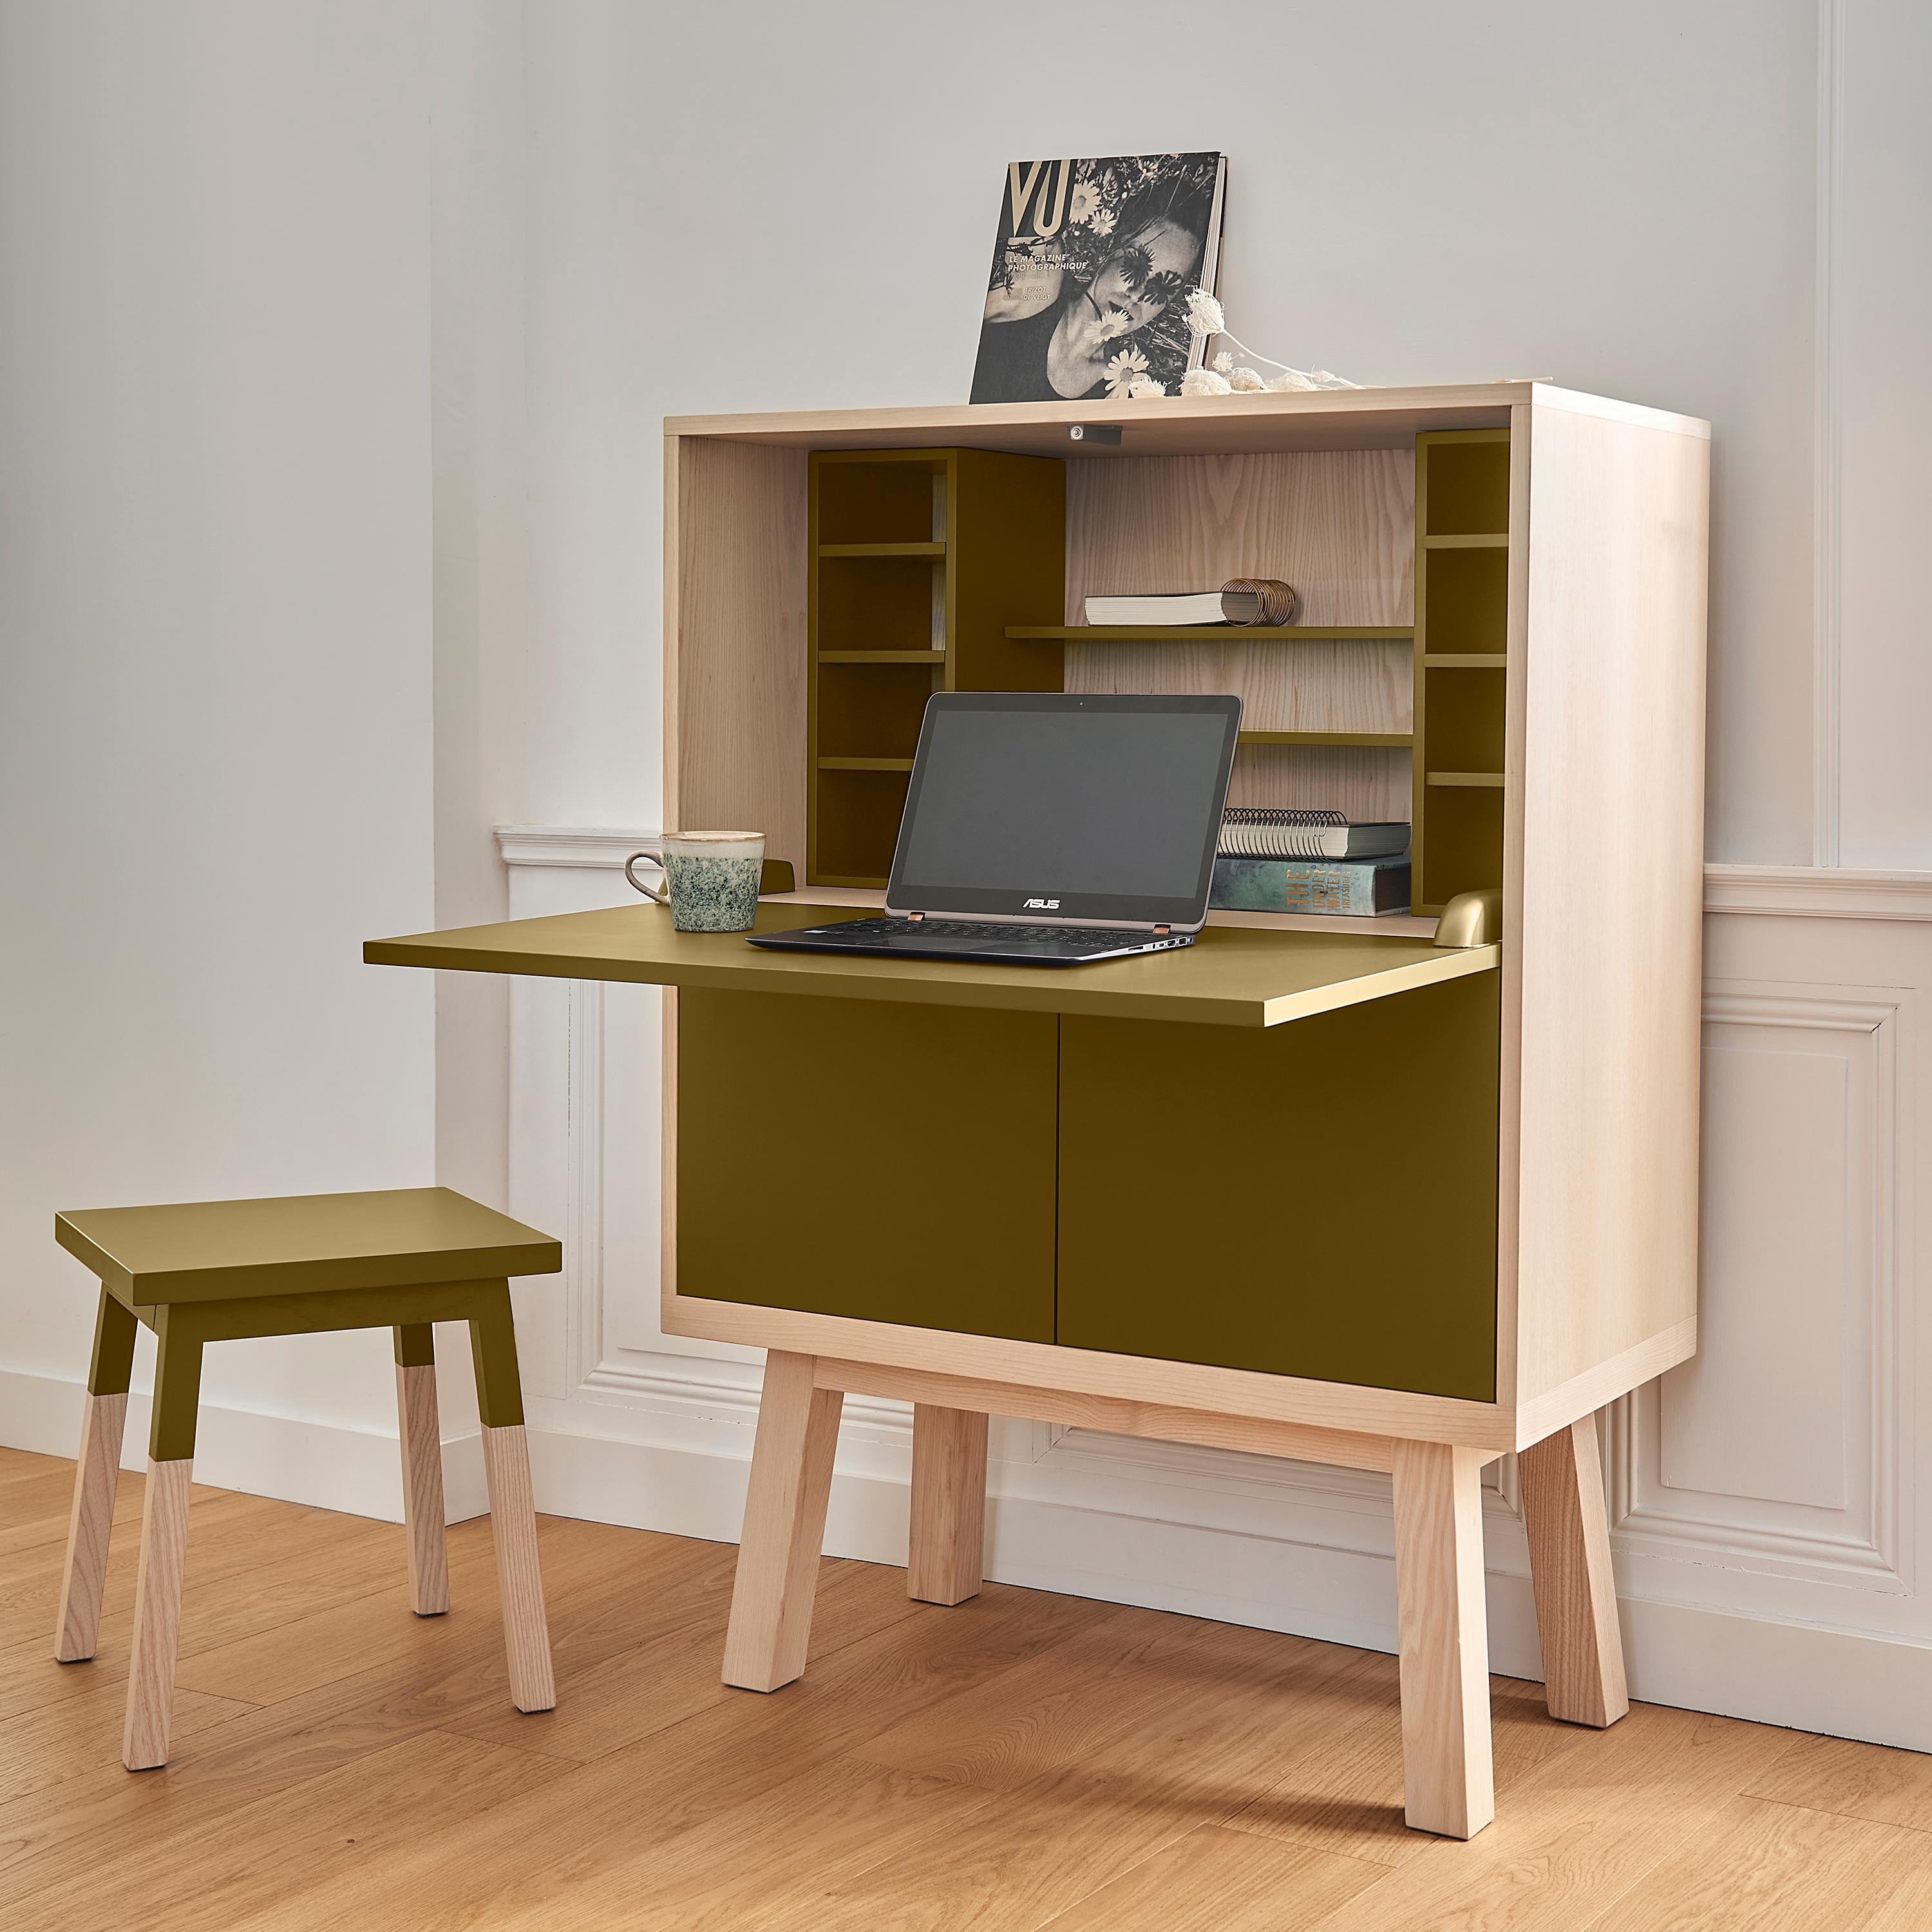 This secretary desk belongs to our ÉGÉE COLLECTION designed by the Parisian designer Eric Gizard. 

Eric adopts for this collection the refined codes of Scandinavian design, combining natural materials and sobriety of lines and adds very beautiful